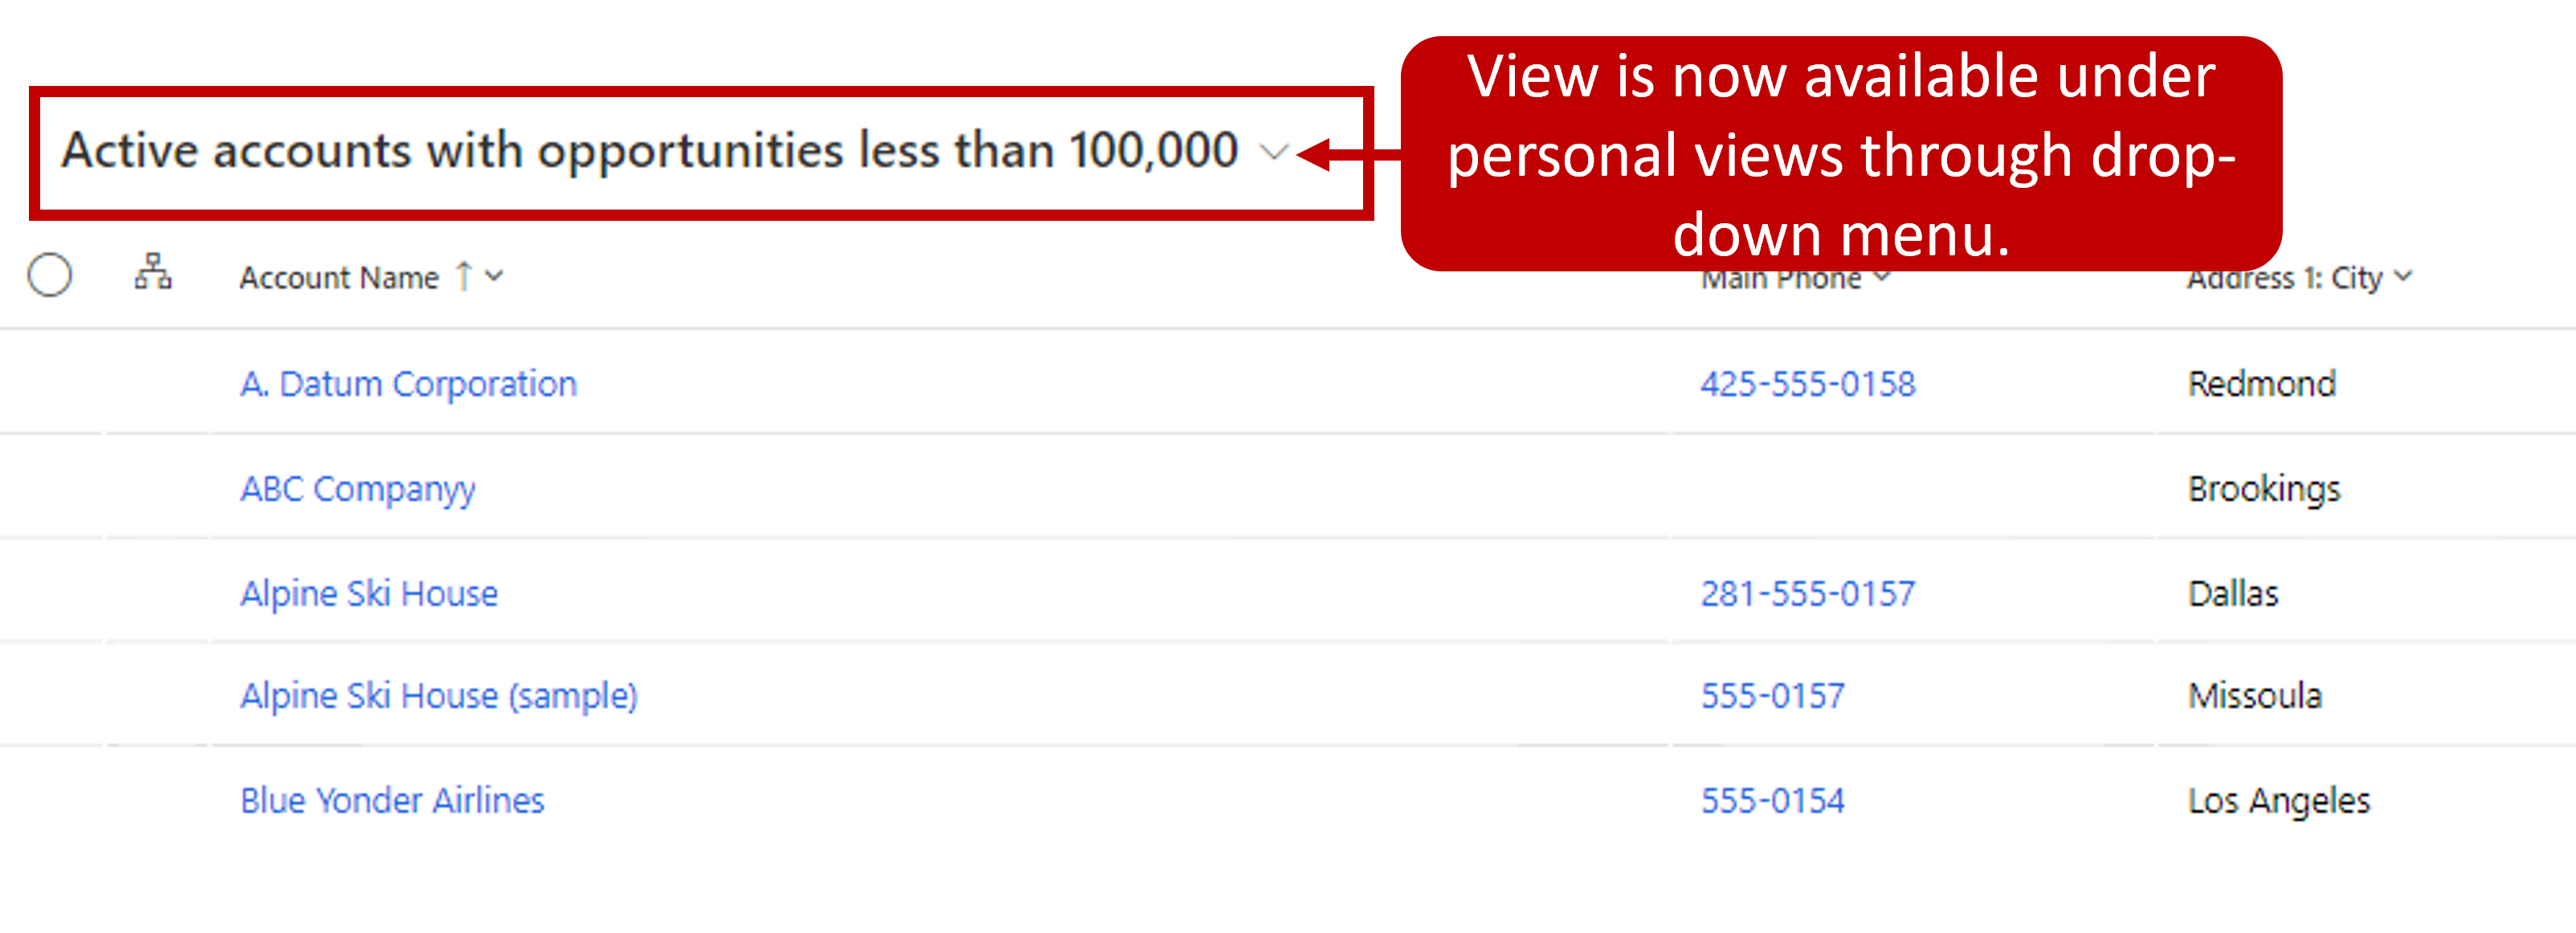 Screenshot showing the view under personal views renamed to Active accounts with opportunities less than 100,000.